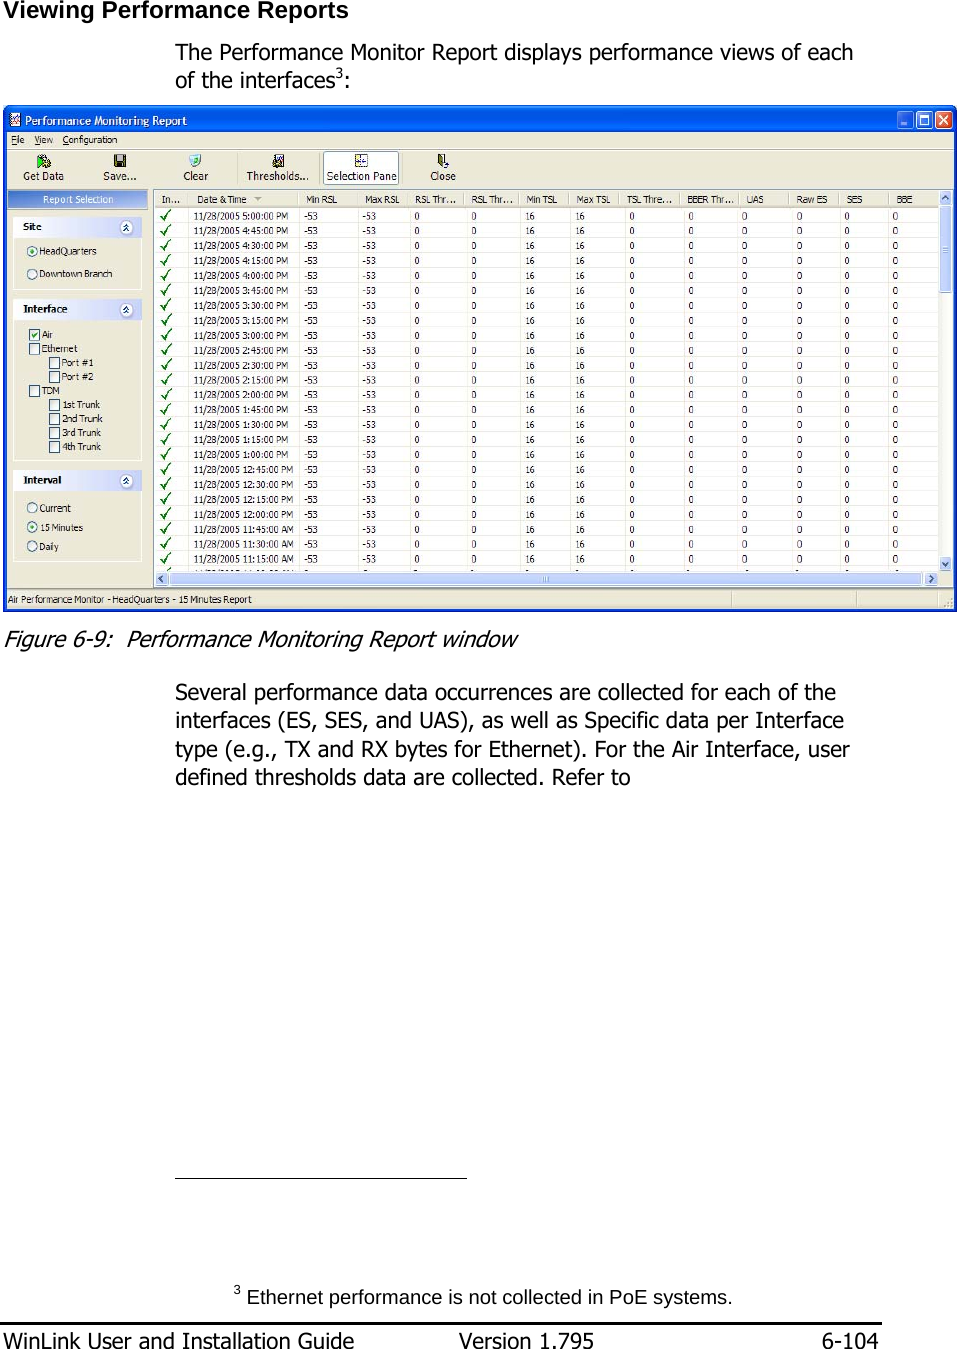  WinLink User and Installation Guide  Version 1.795  6-104  Viewing Performance Reports The Performance Monitor Report displays performance views of each of the interfaces3:  Figure  6-9:  Performance Monitoring Report window Several performance data occurrences are collected for each of the interfaces (ES, SES, and UAS), as well as Specific data per Interface type (e.g., TX and RX bytes for Ethernet). For the Air Interface, user defined thresholds data are collected. Refer to                                                     3 Ethernet performance is not collected in PoE systems.  